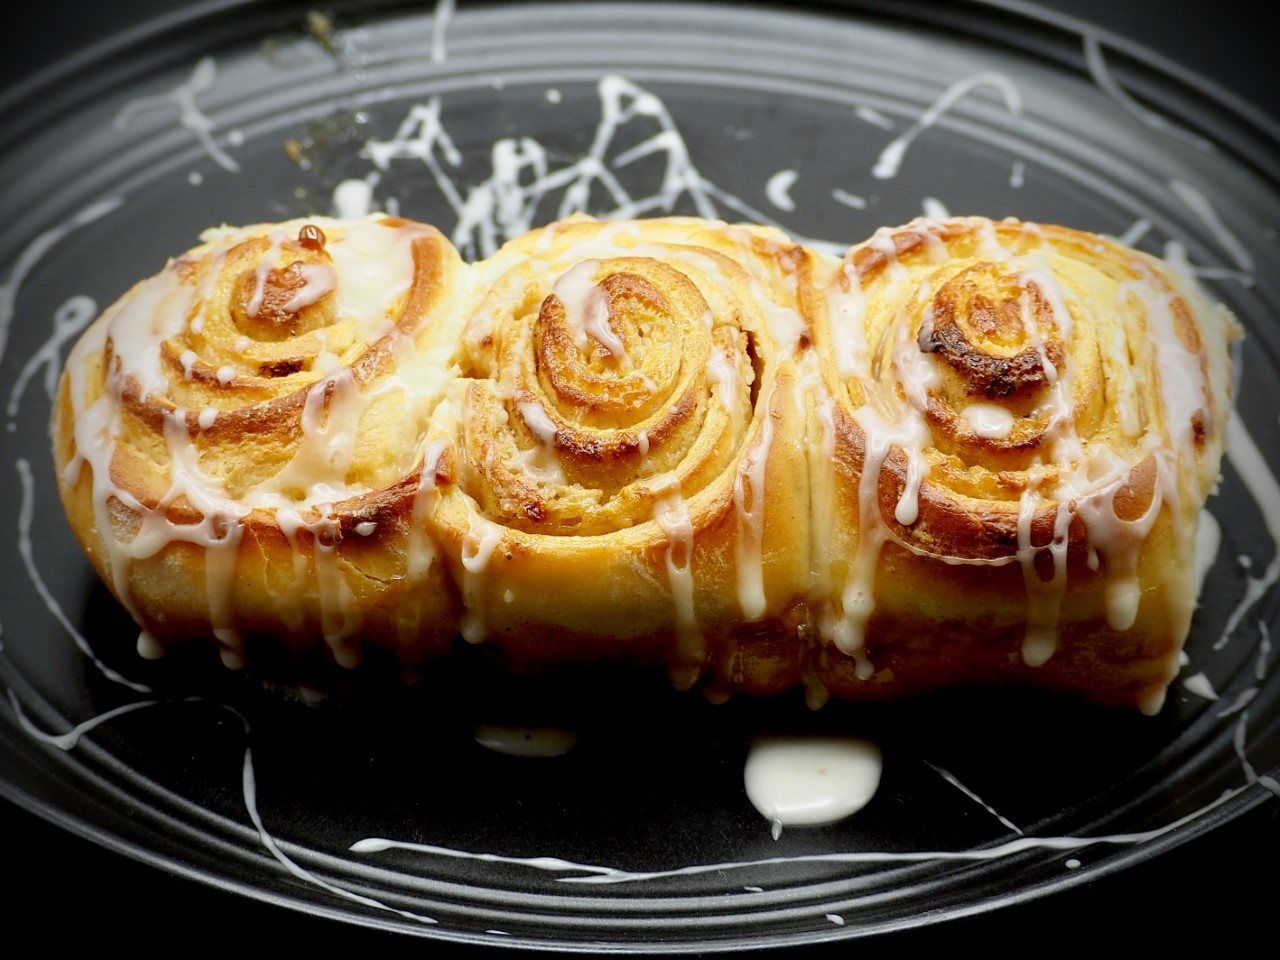 The Most Amazing Cinnamon Buns Ever!